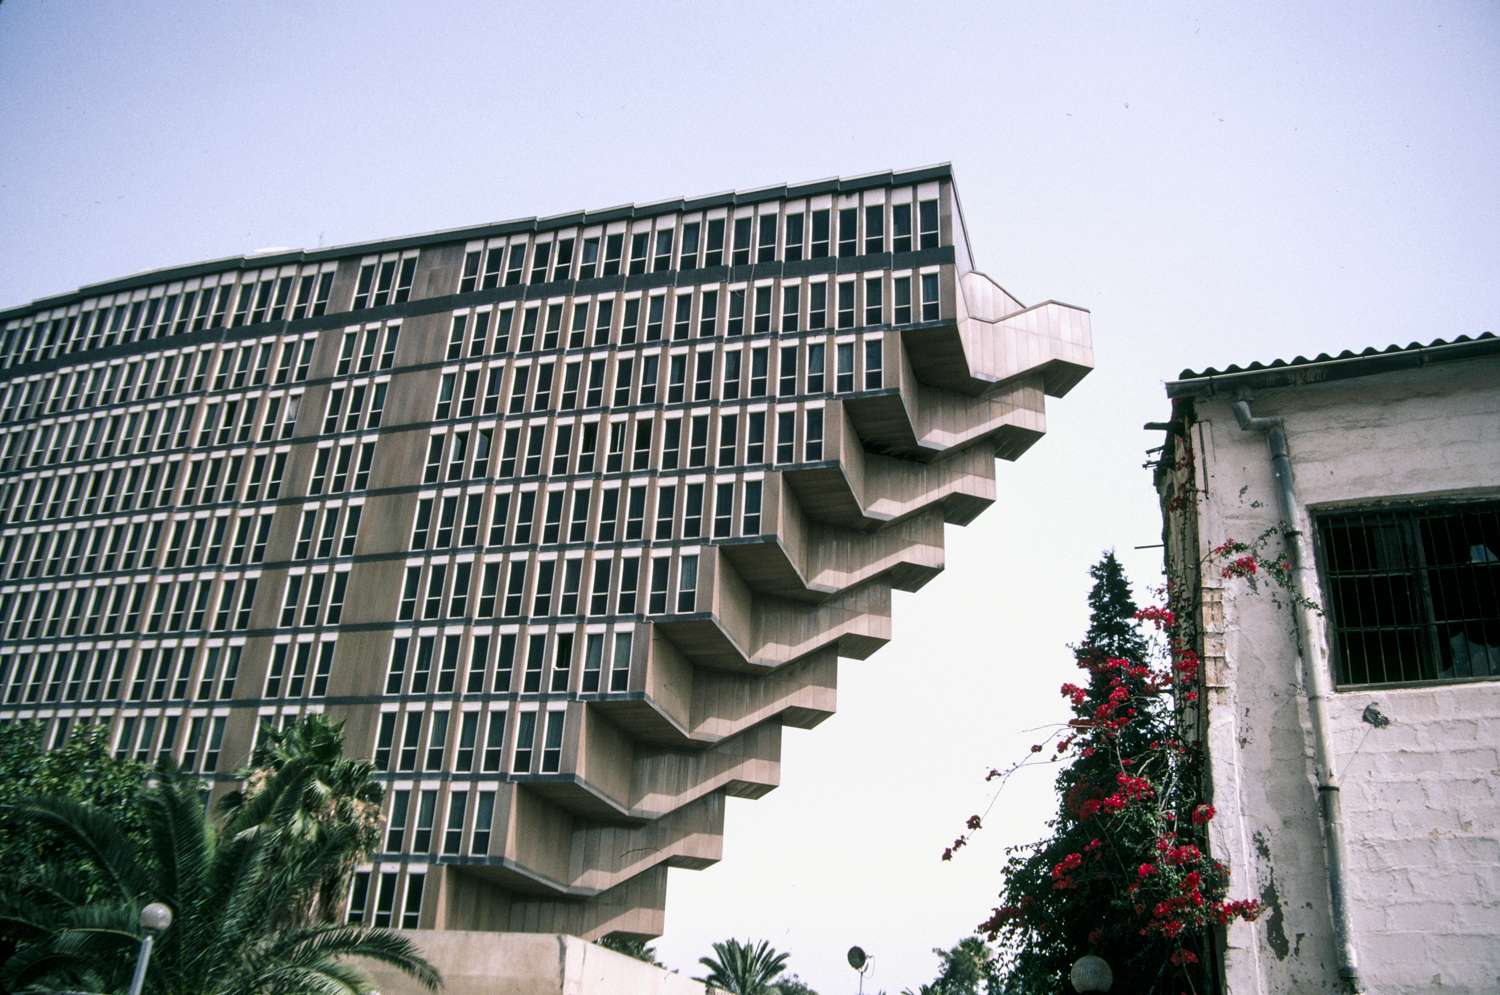 Hôtel du Lac designed by Raffaele Contigiani in the early 1970s. Image sourced from MIT. 